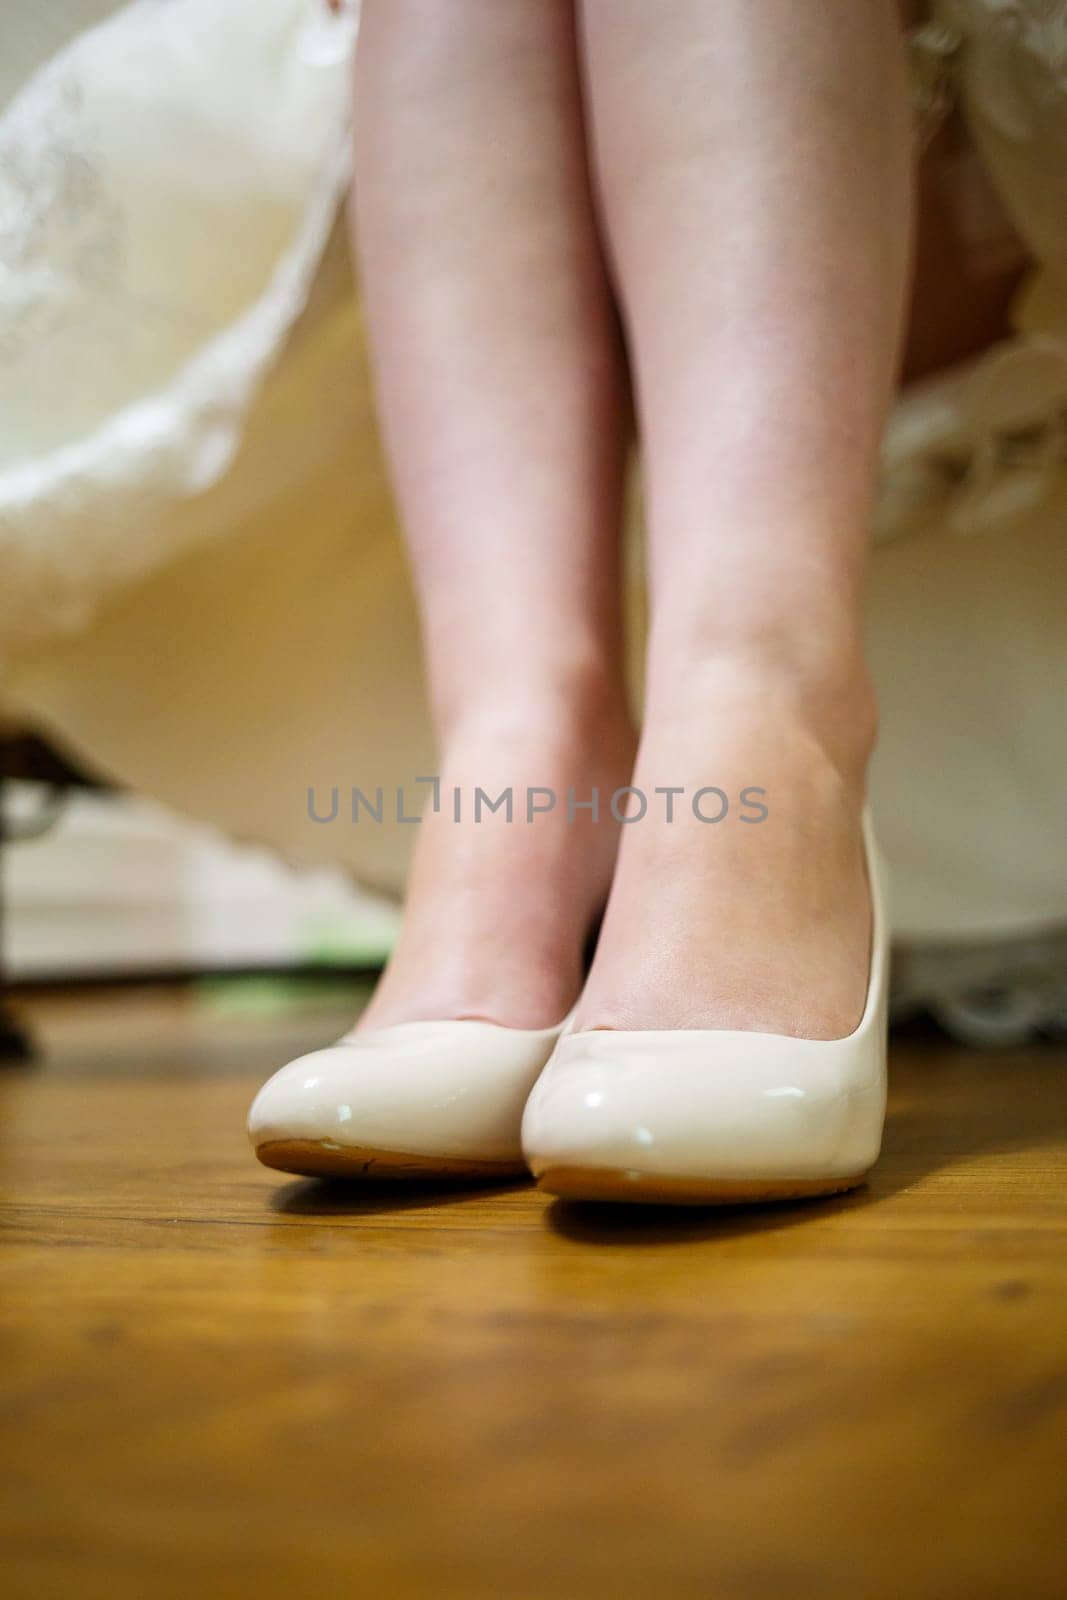 Women's shoes on the wedding day for the bride by Dmitrytph